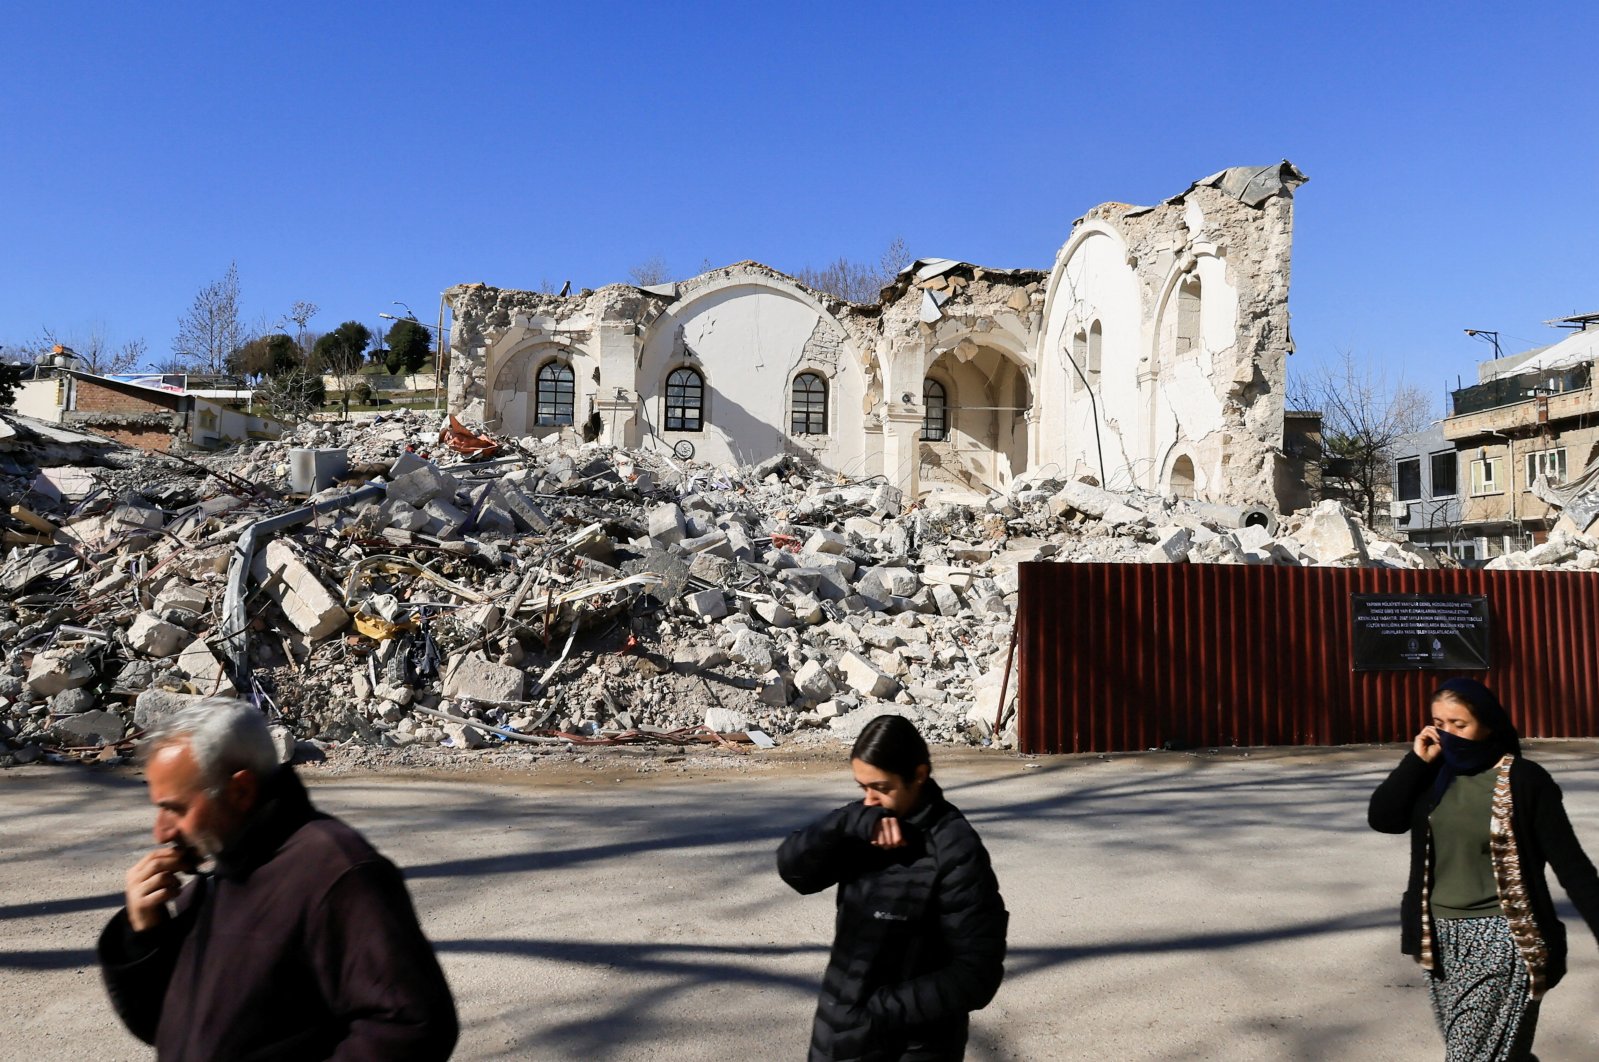 People walk past the damaged Ulu Cami Mosque, in the aftermath of a deadly earthquake in Adıyaman, Türkiye, Feb. 17, 2023. (Reuters File Photo)